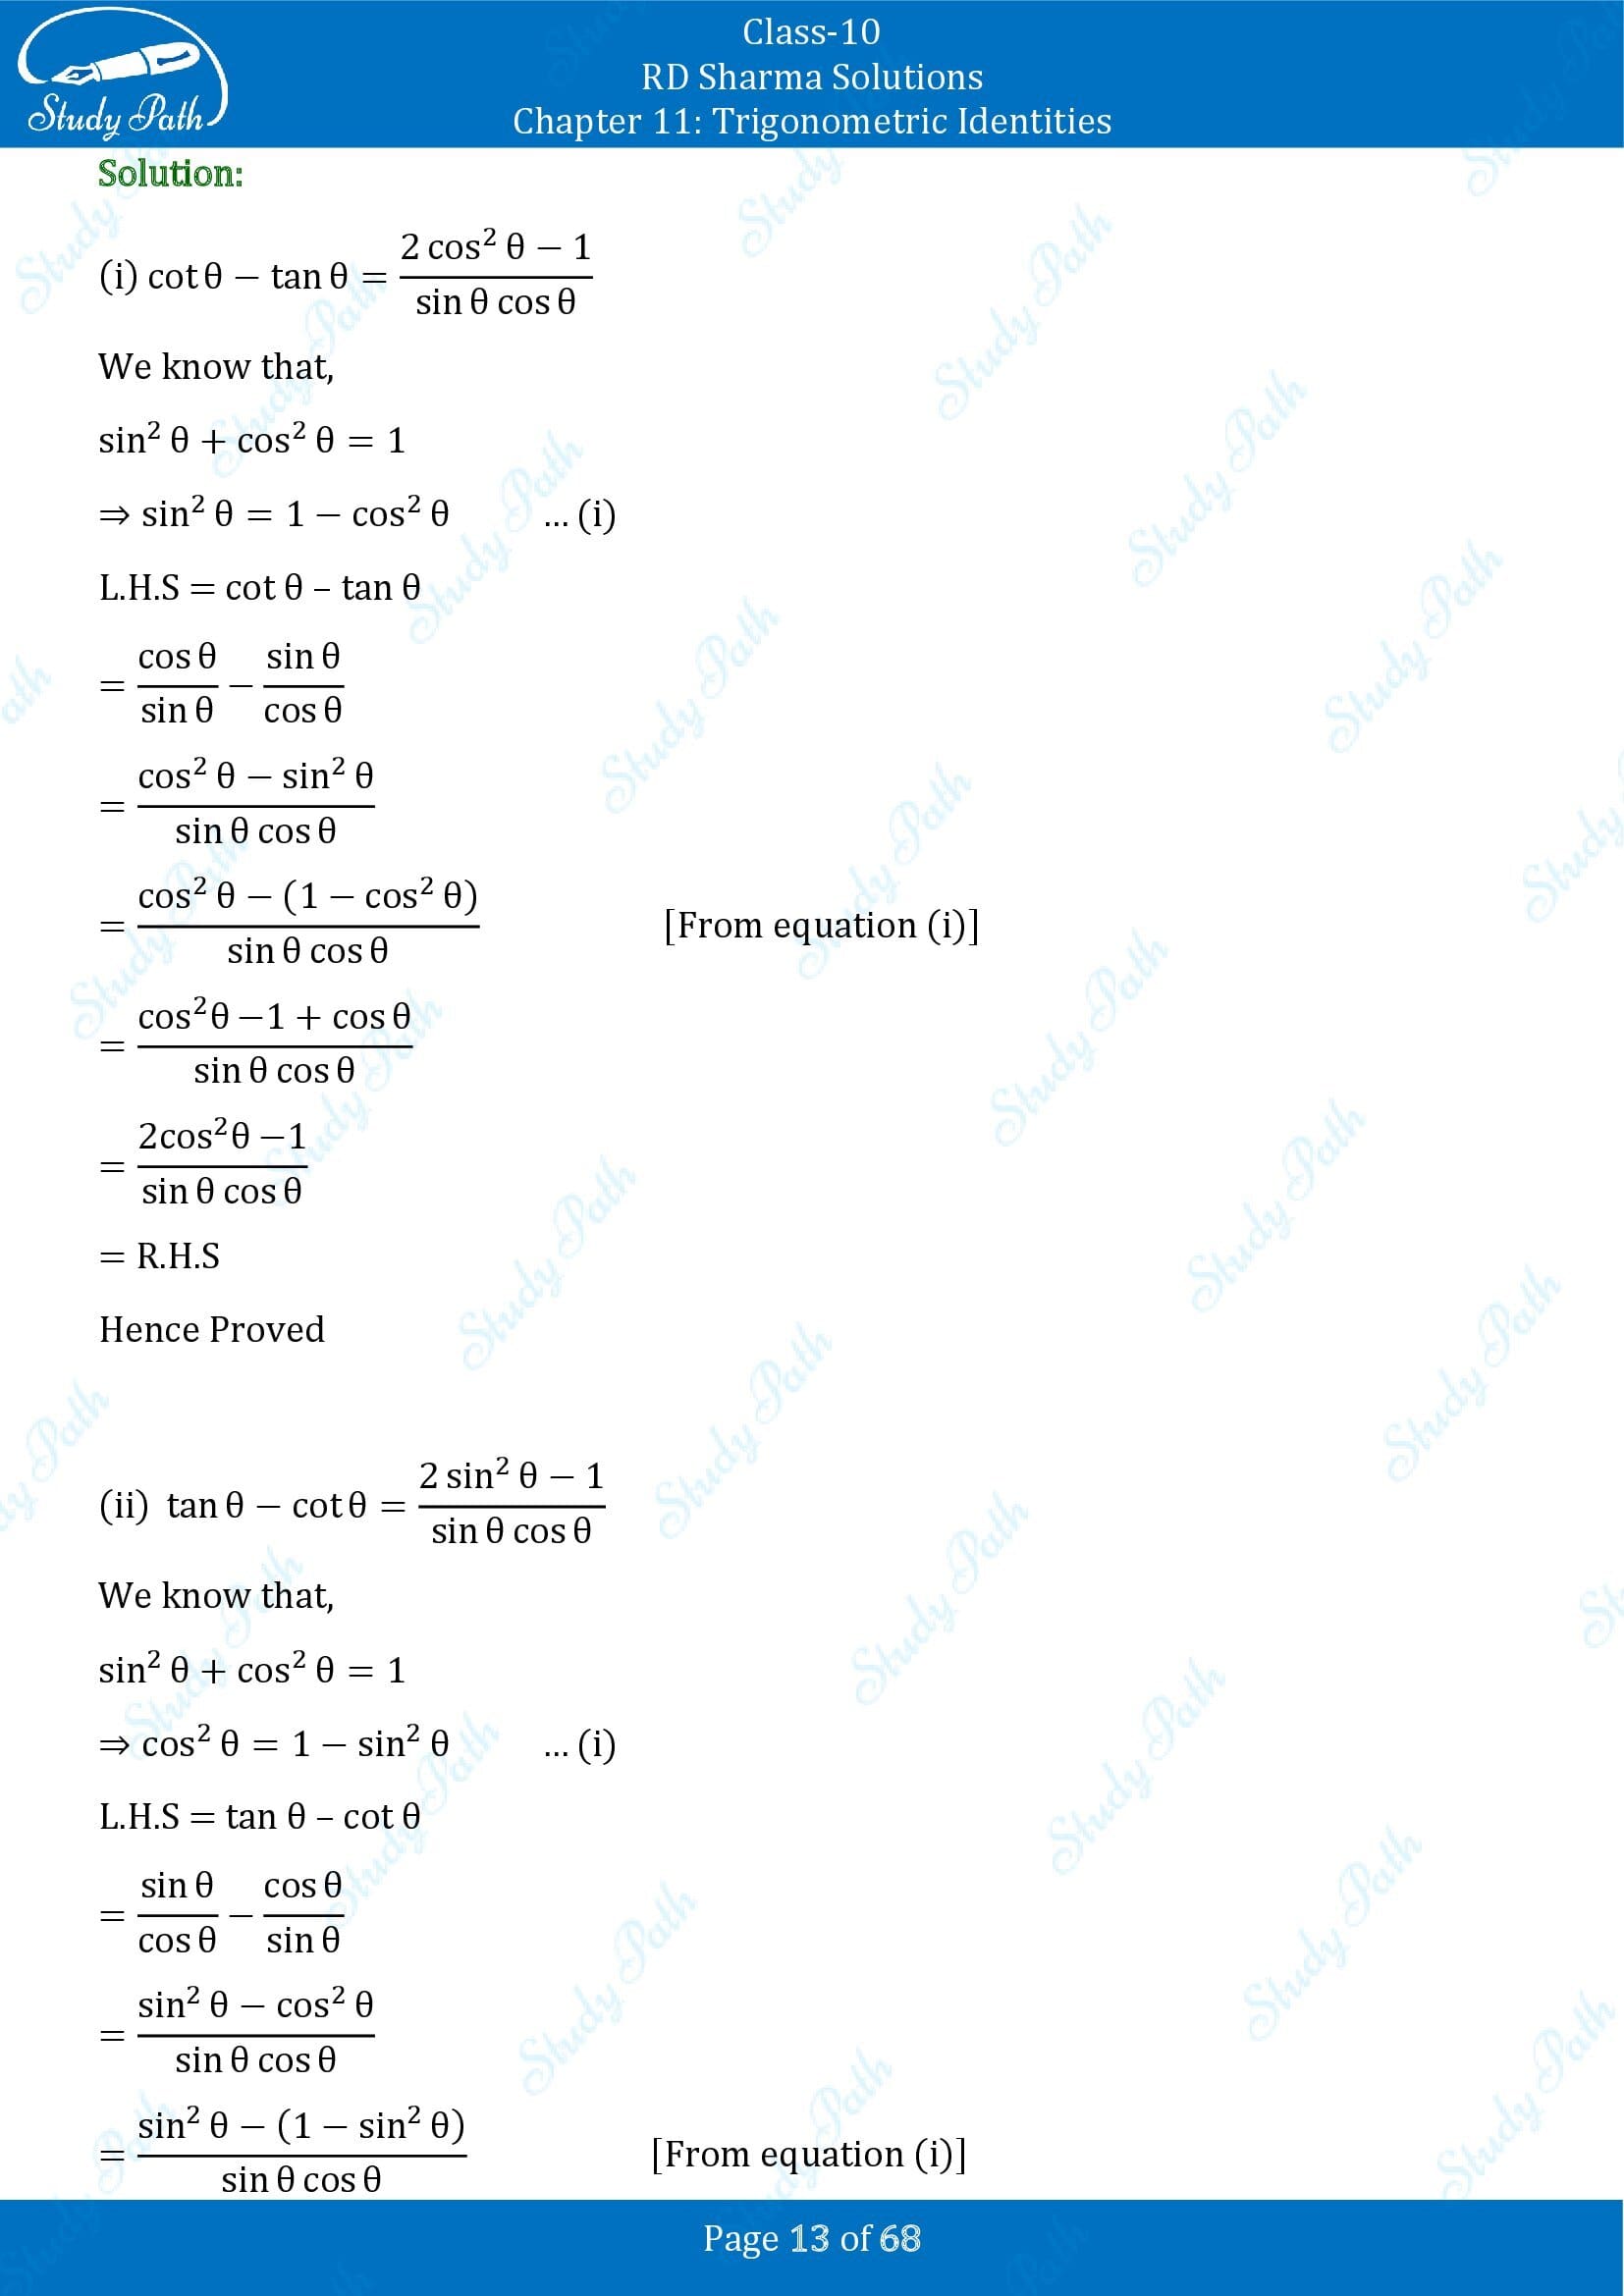 RD Sharma Solutions Class 10 Chapter 11 Trigonometric Identities Exercise 11.1 00013